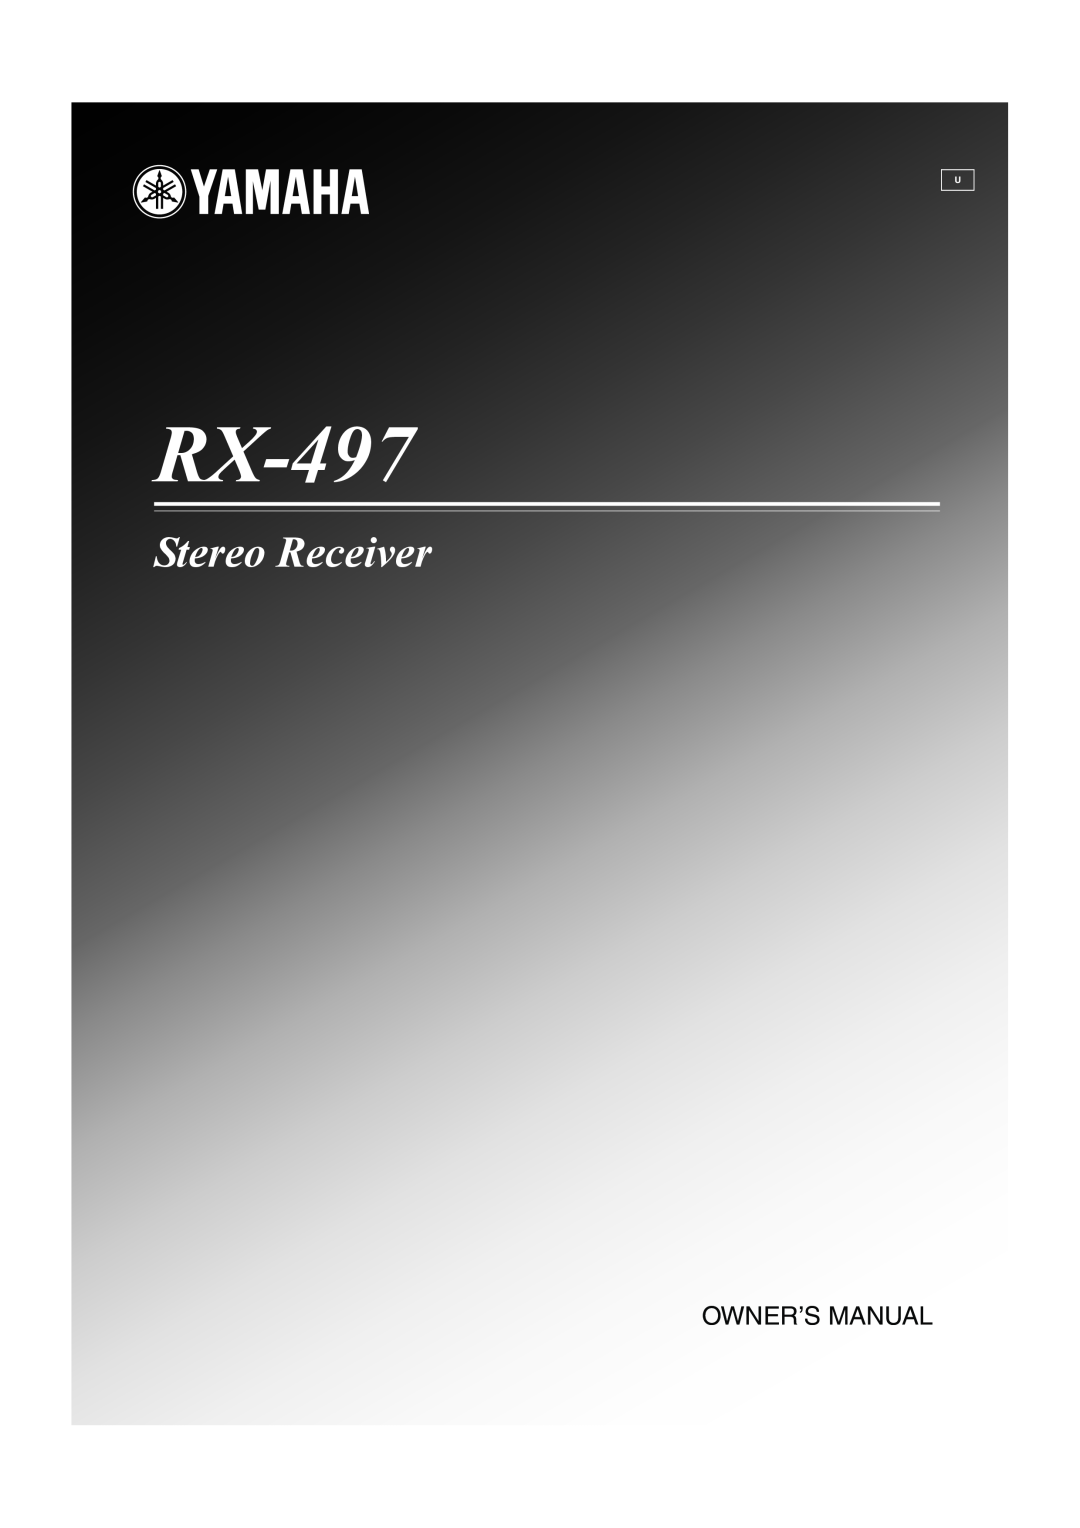 Yamaha RX-497 owner manual Stereo Receiver 